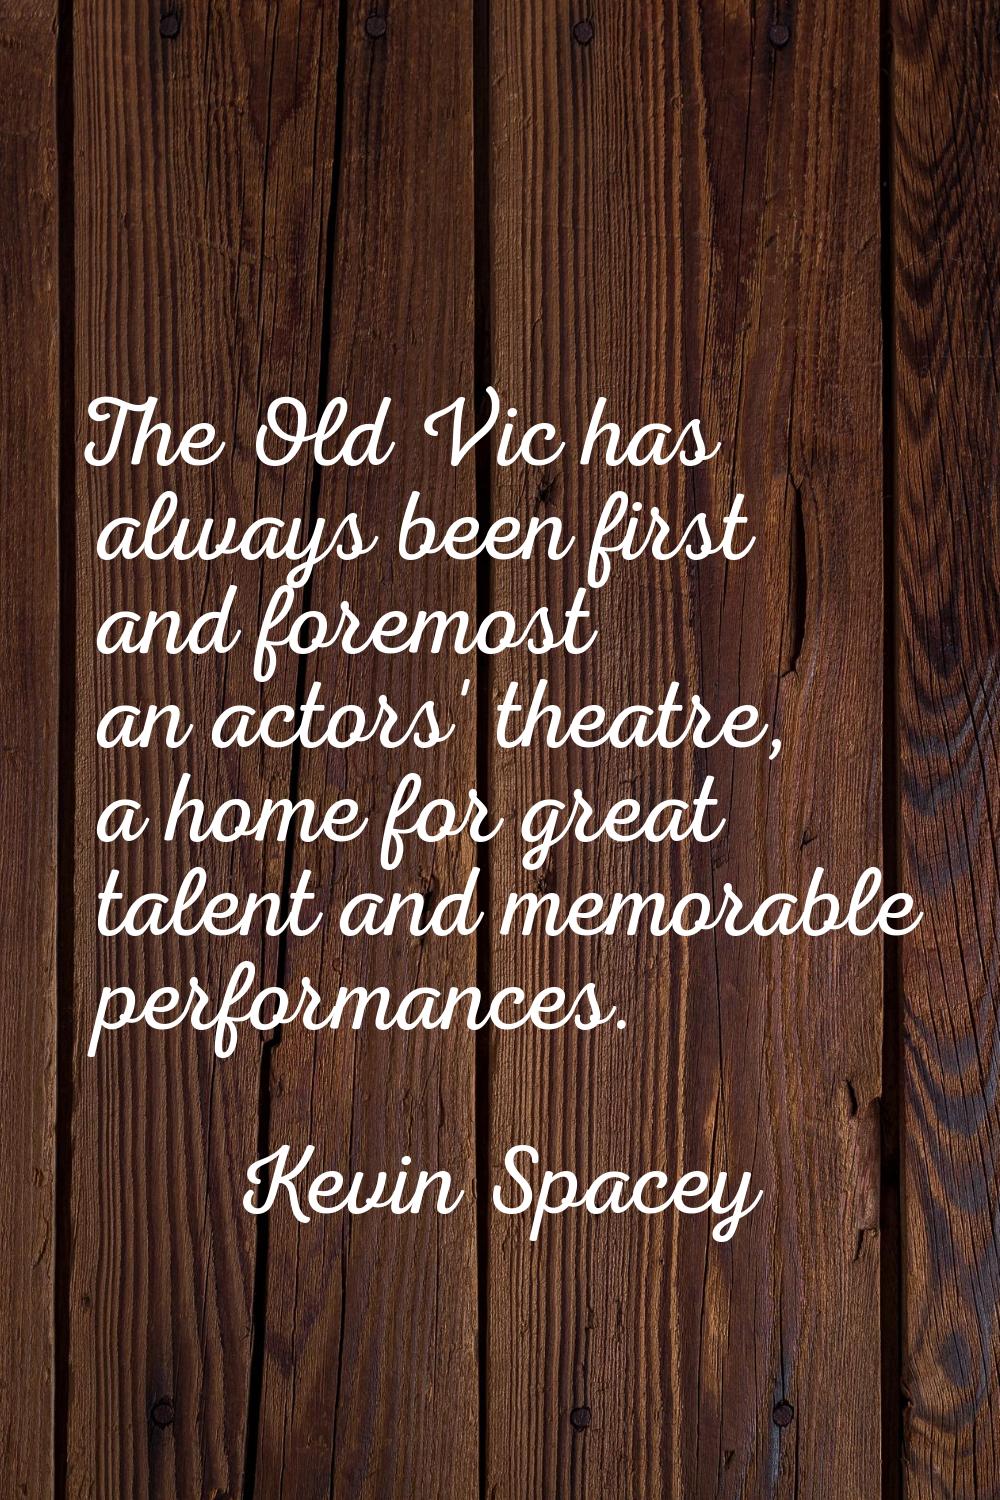 The Old Vic has always been first and foremost an actors' theatre, a home for great talent and memo